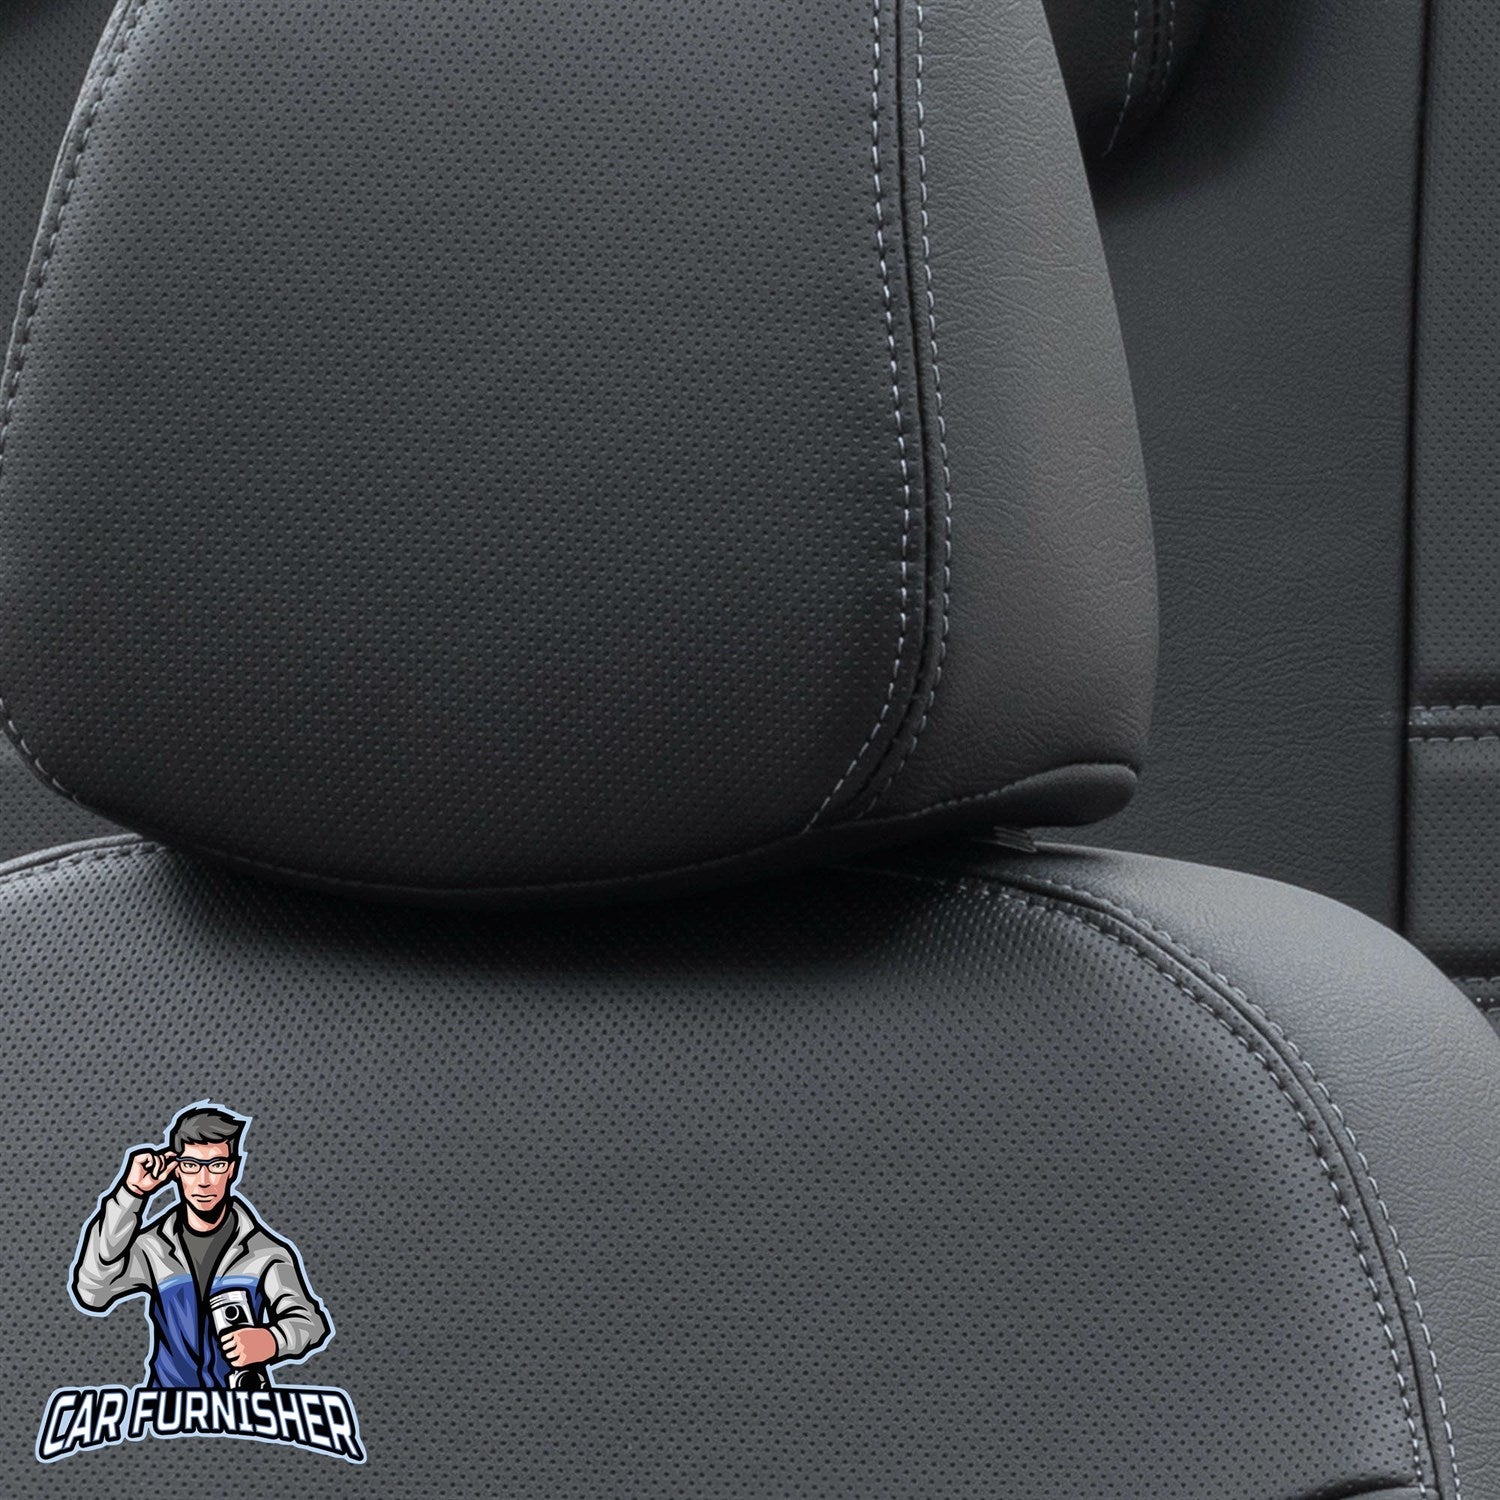 Mercedes ML Seat Covers Istanbul Leather Design Black Leather